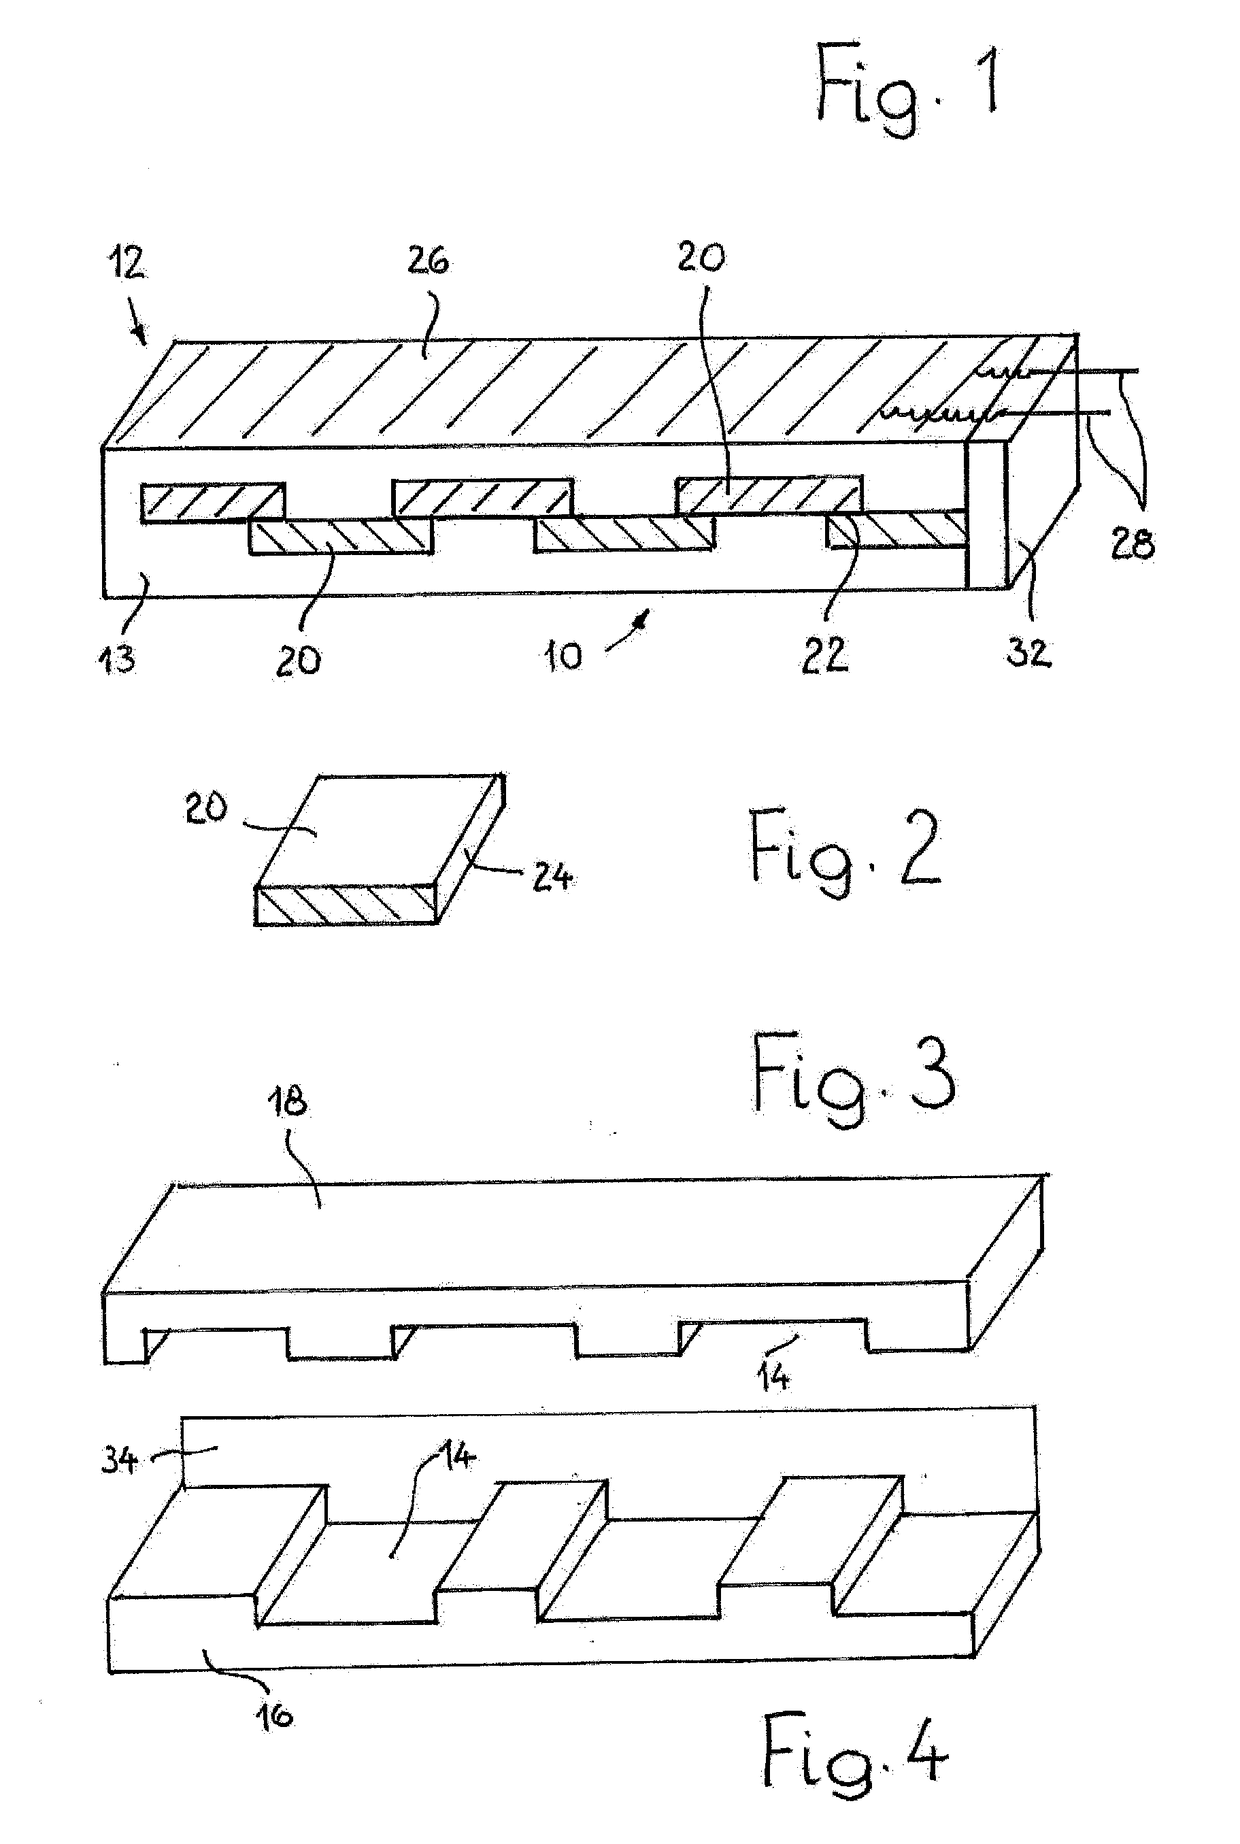 Bar-shaped inductive component